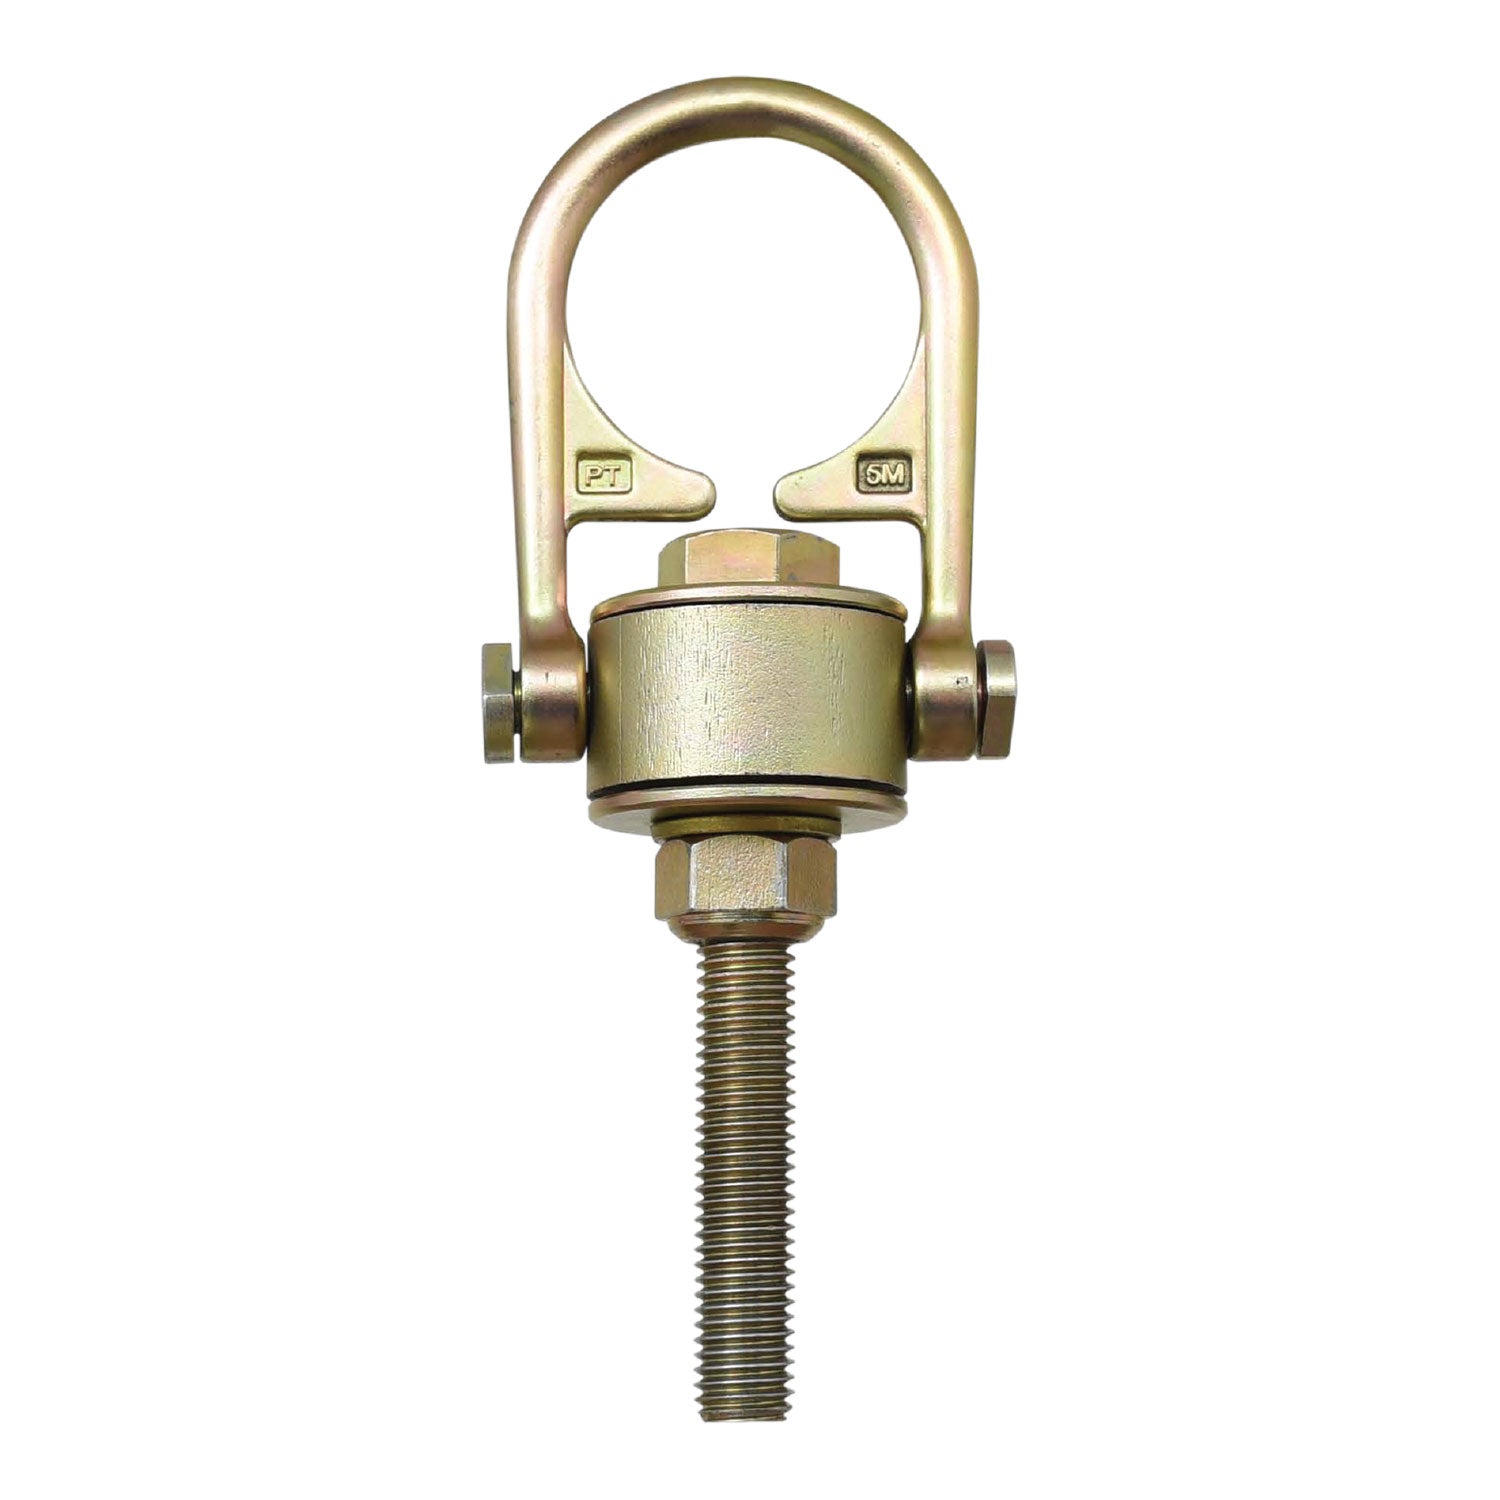 KStrong UFA30311 Bully Swivel 10K Anchor for Metal Structure with 5/8", 4" Long Hex Head Bolt, Nut, and Washer